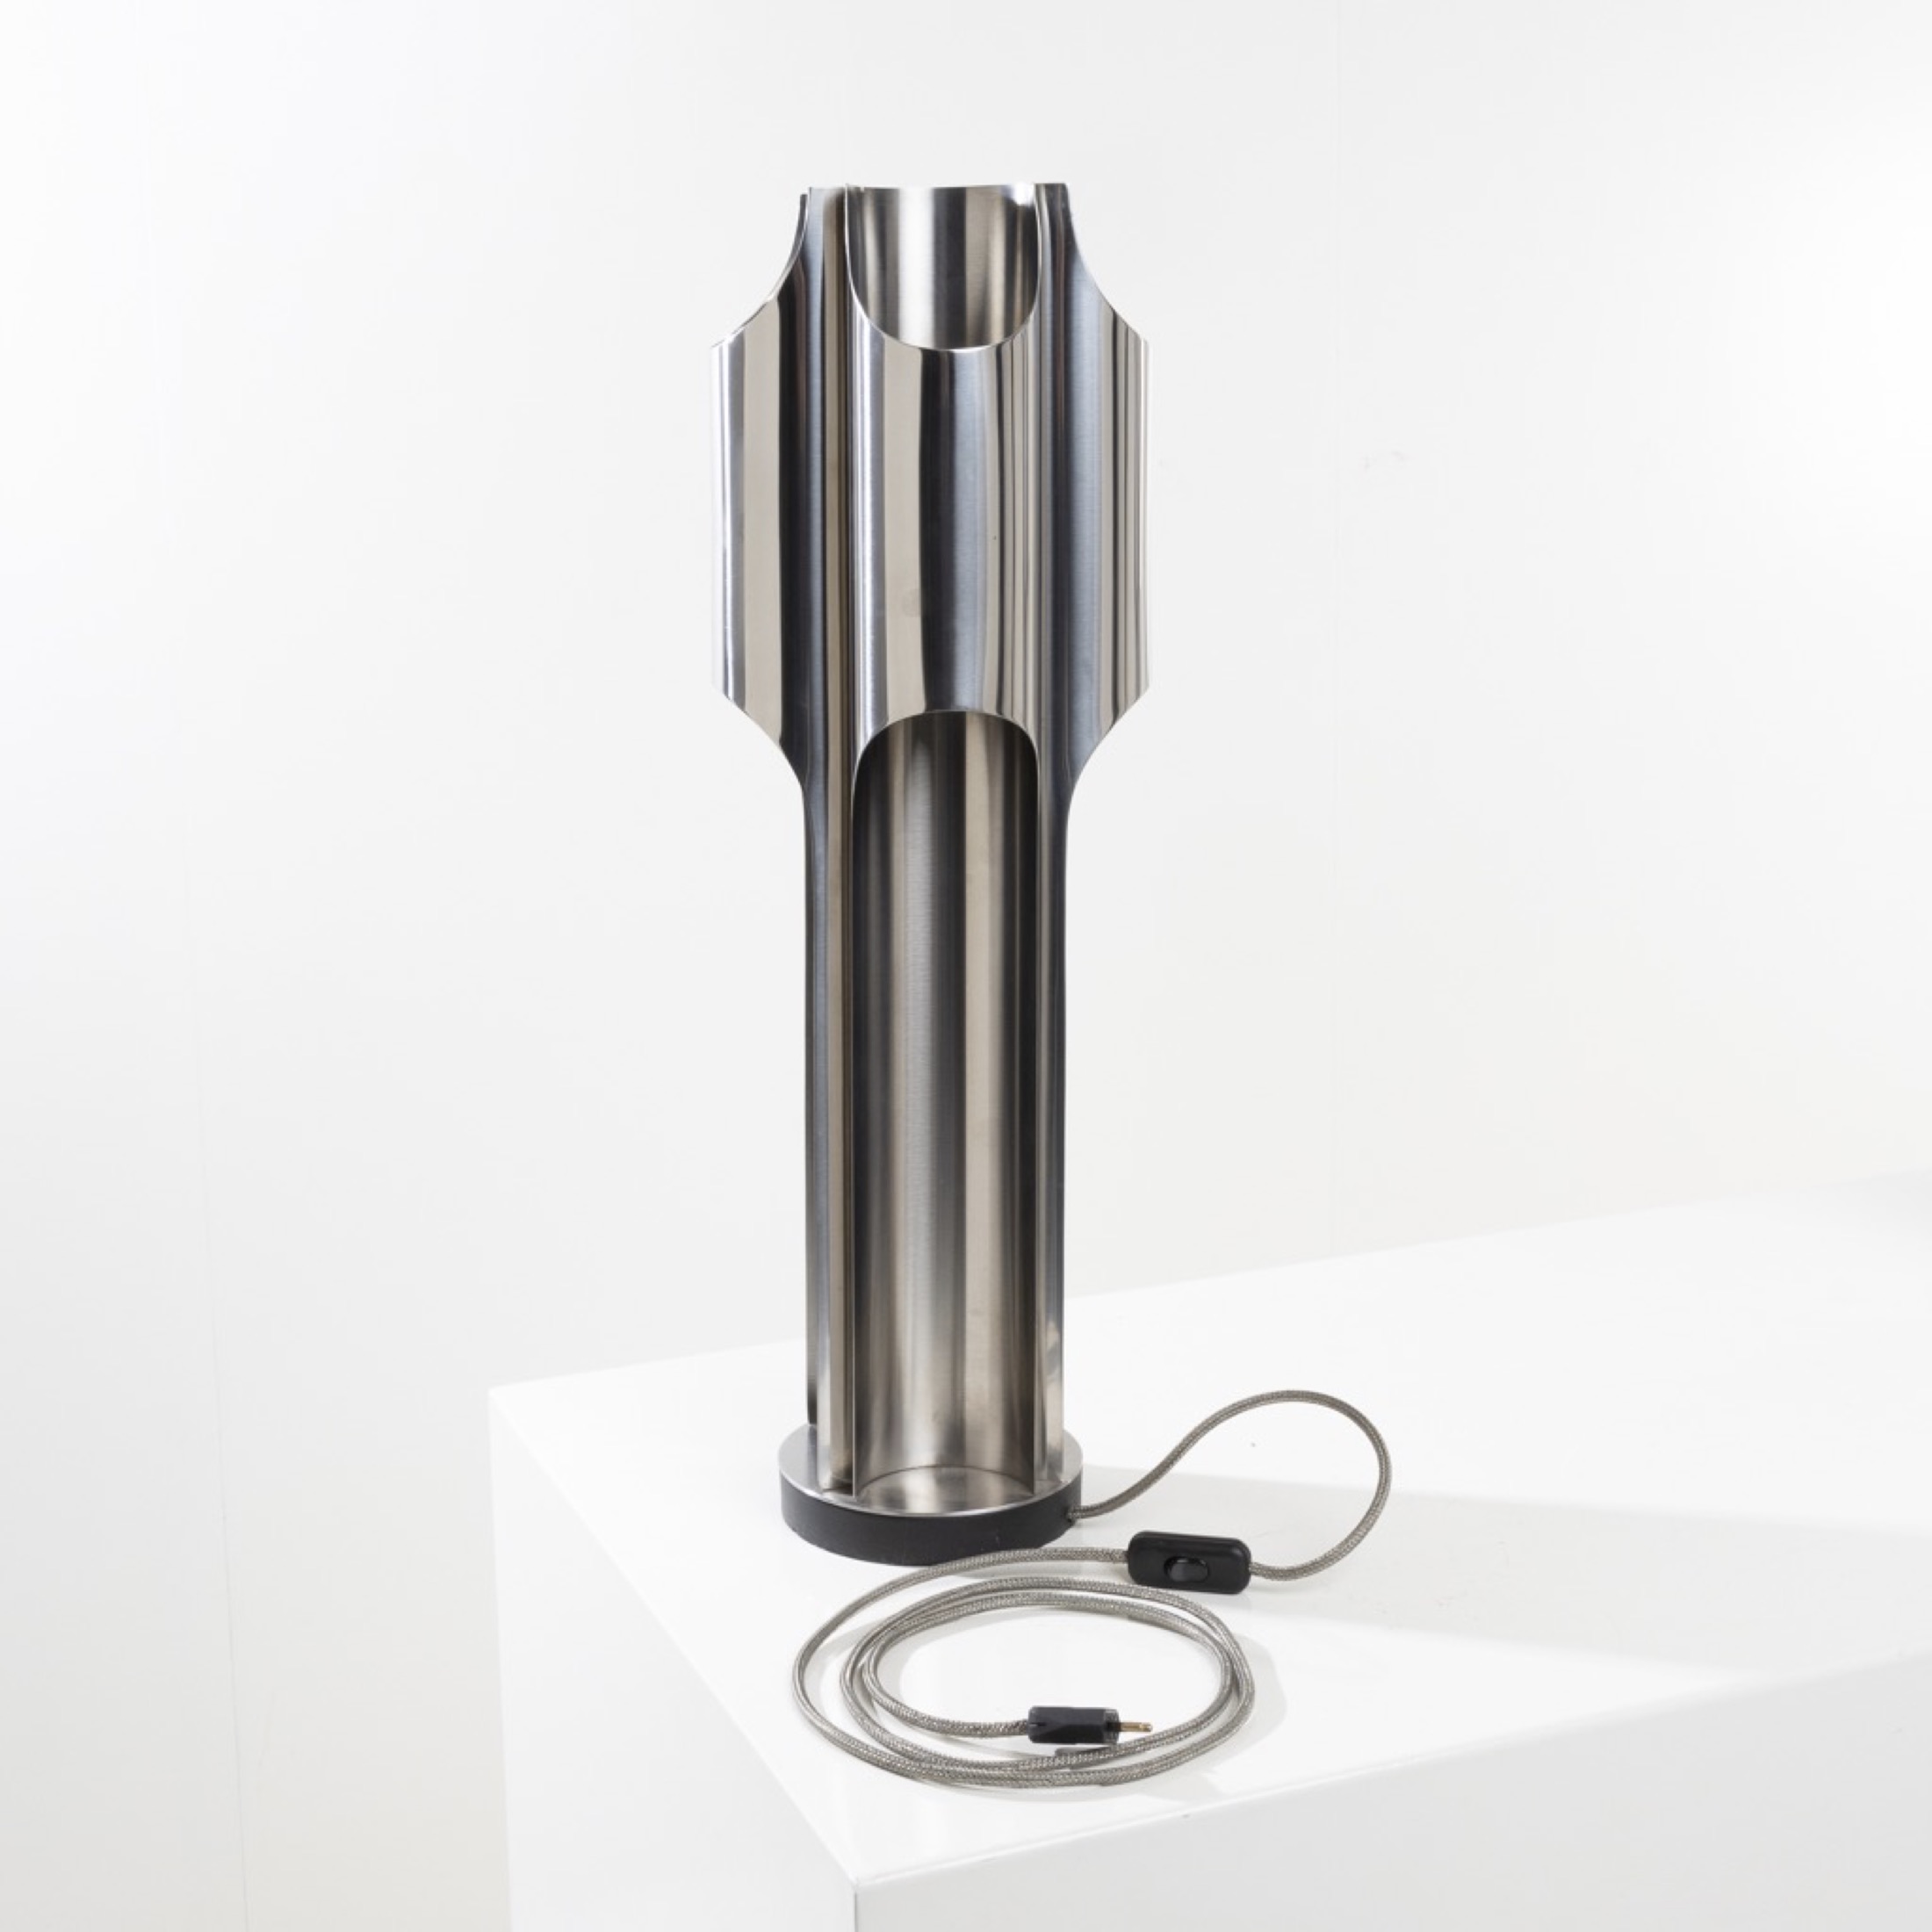 Orgues by Maison Charles - Pair of stainless steel table lamps